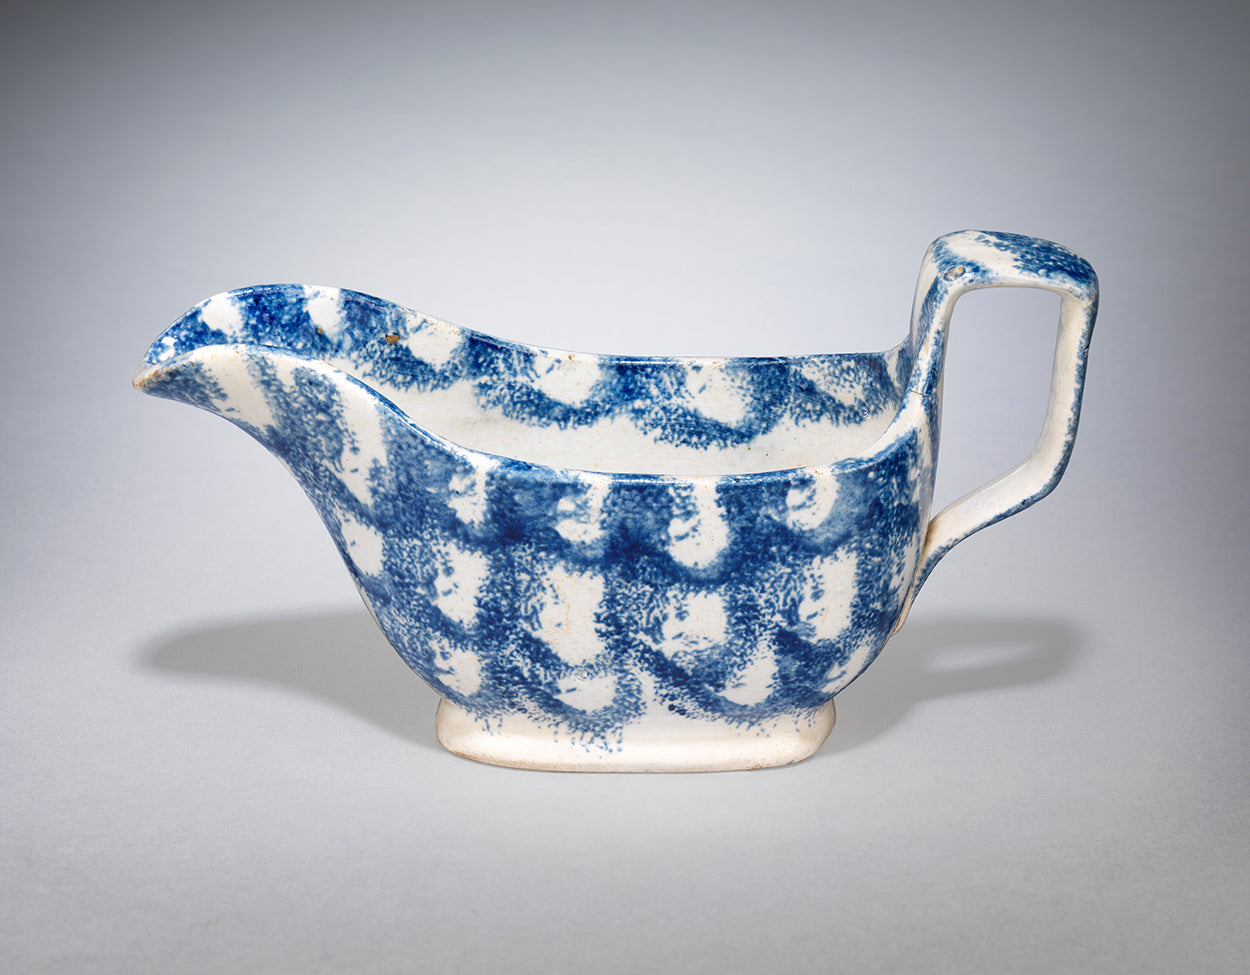 A Rare and Early Spongeware Sauce Boat of Classic Form with Fine Sponged Decoration